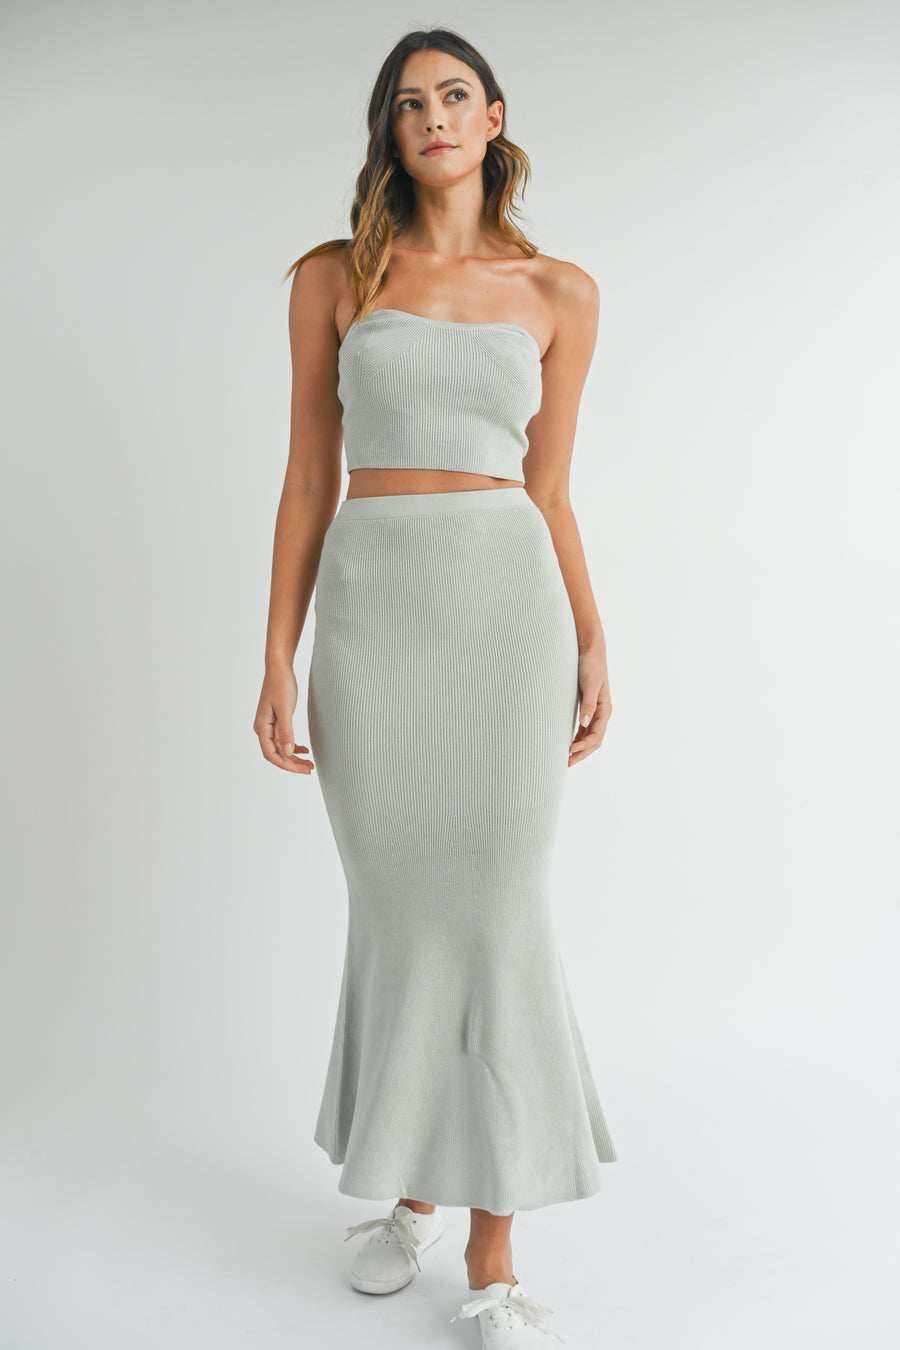 Mermaid maxi skirt in the color Light Sage with an elastic waistband. 